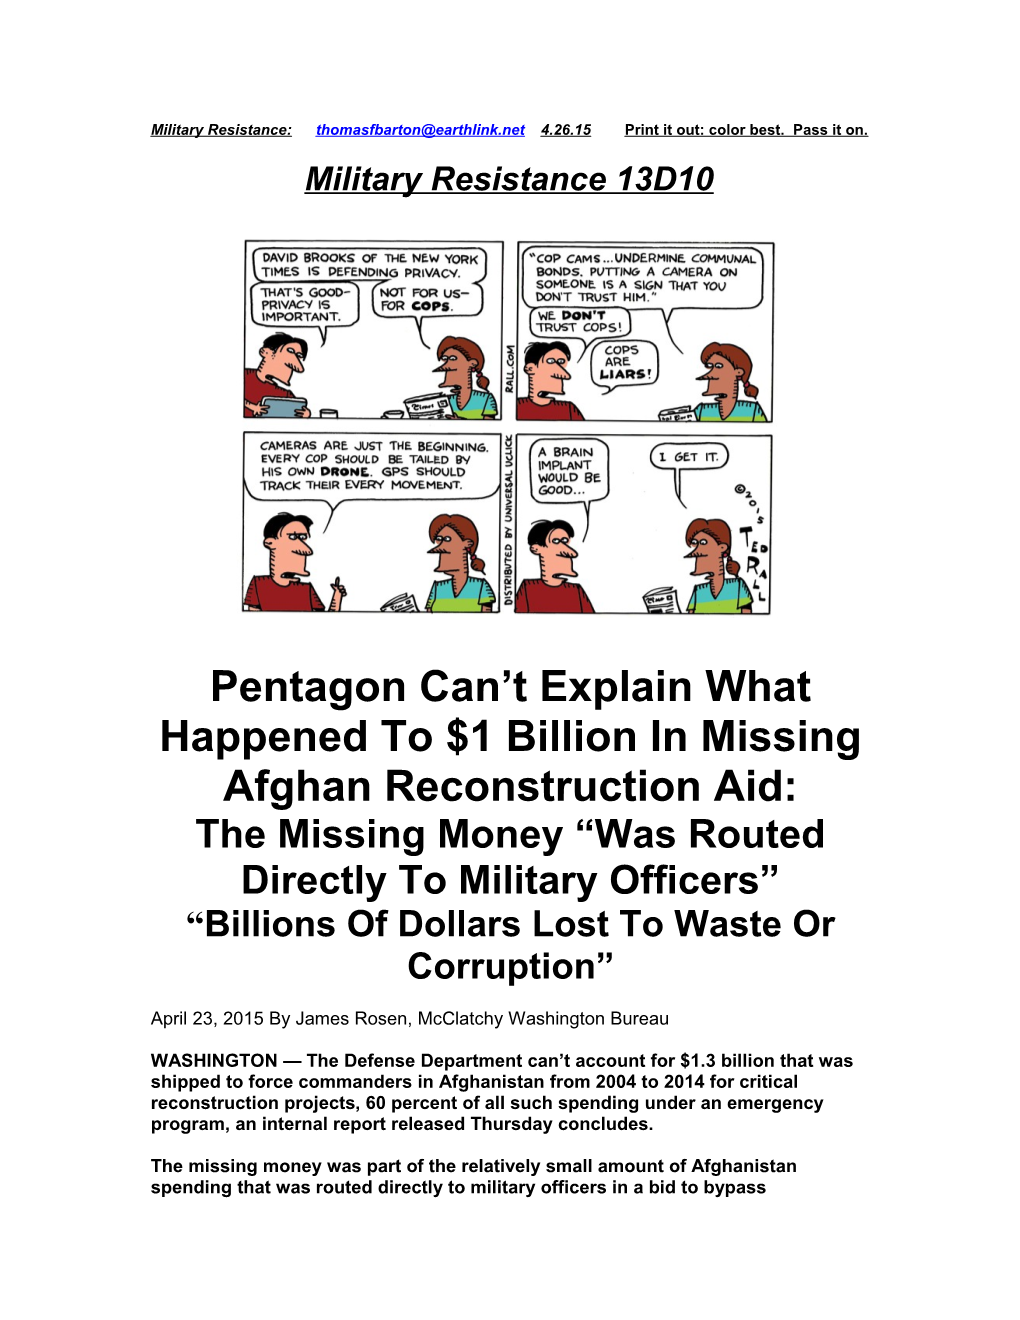 Pentagon Can T Explain What Happened to $1 Billion in Missing Afghan Reconstruction Aid